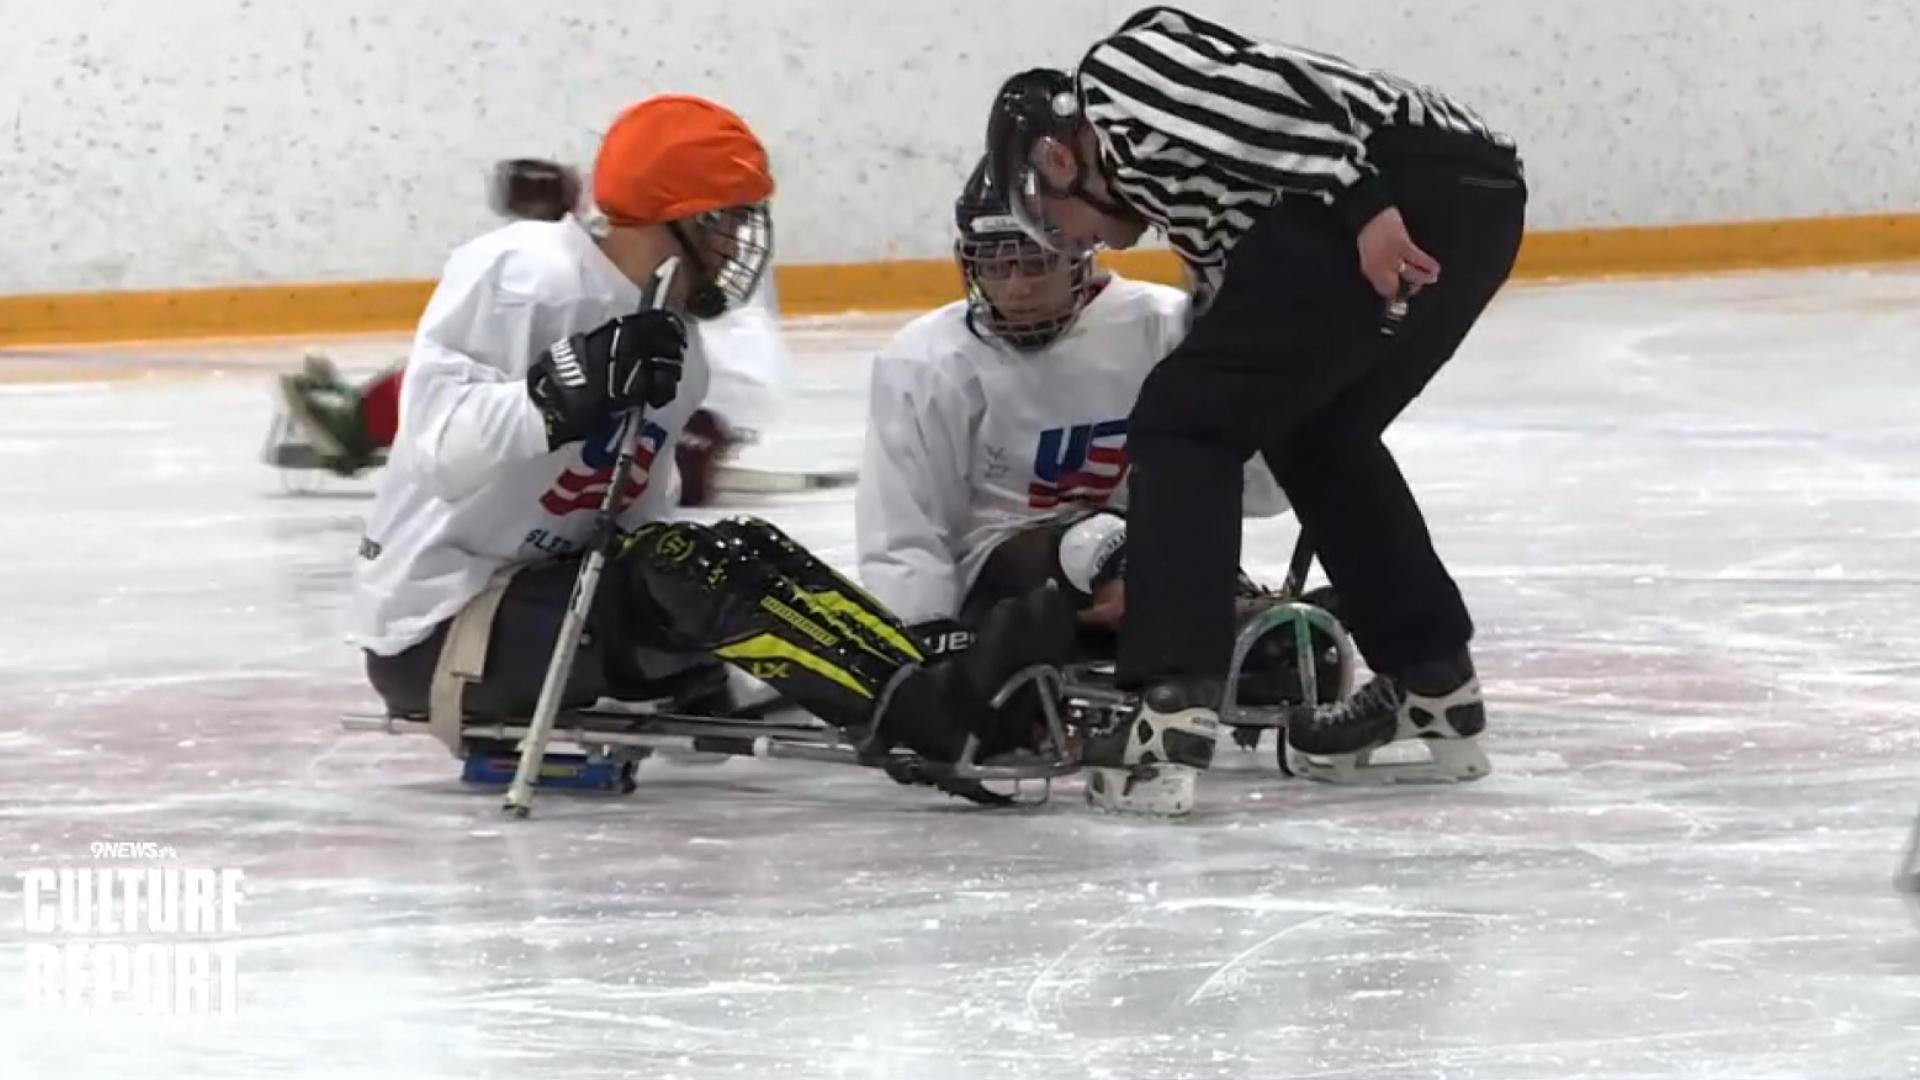 The camp's participants sharpened their skills on the ice by receiving training from respected coaches and members of the USA Hockey National Sled Hockey Team.